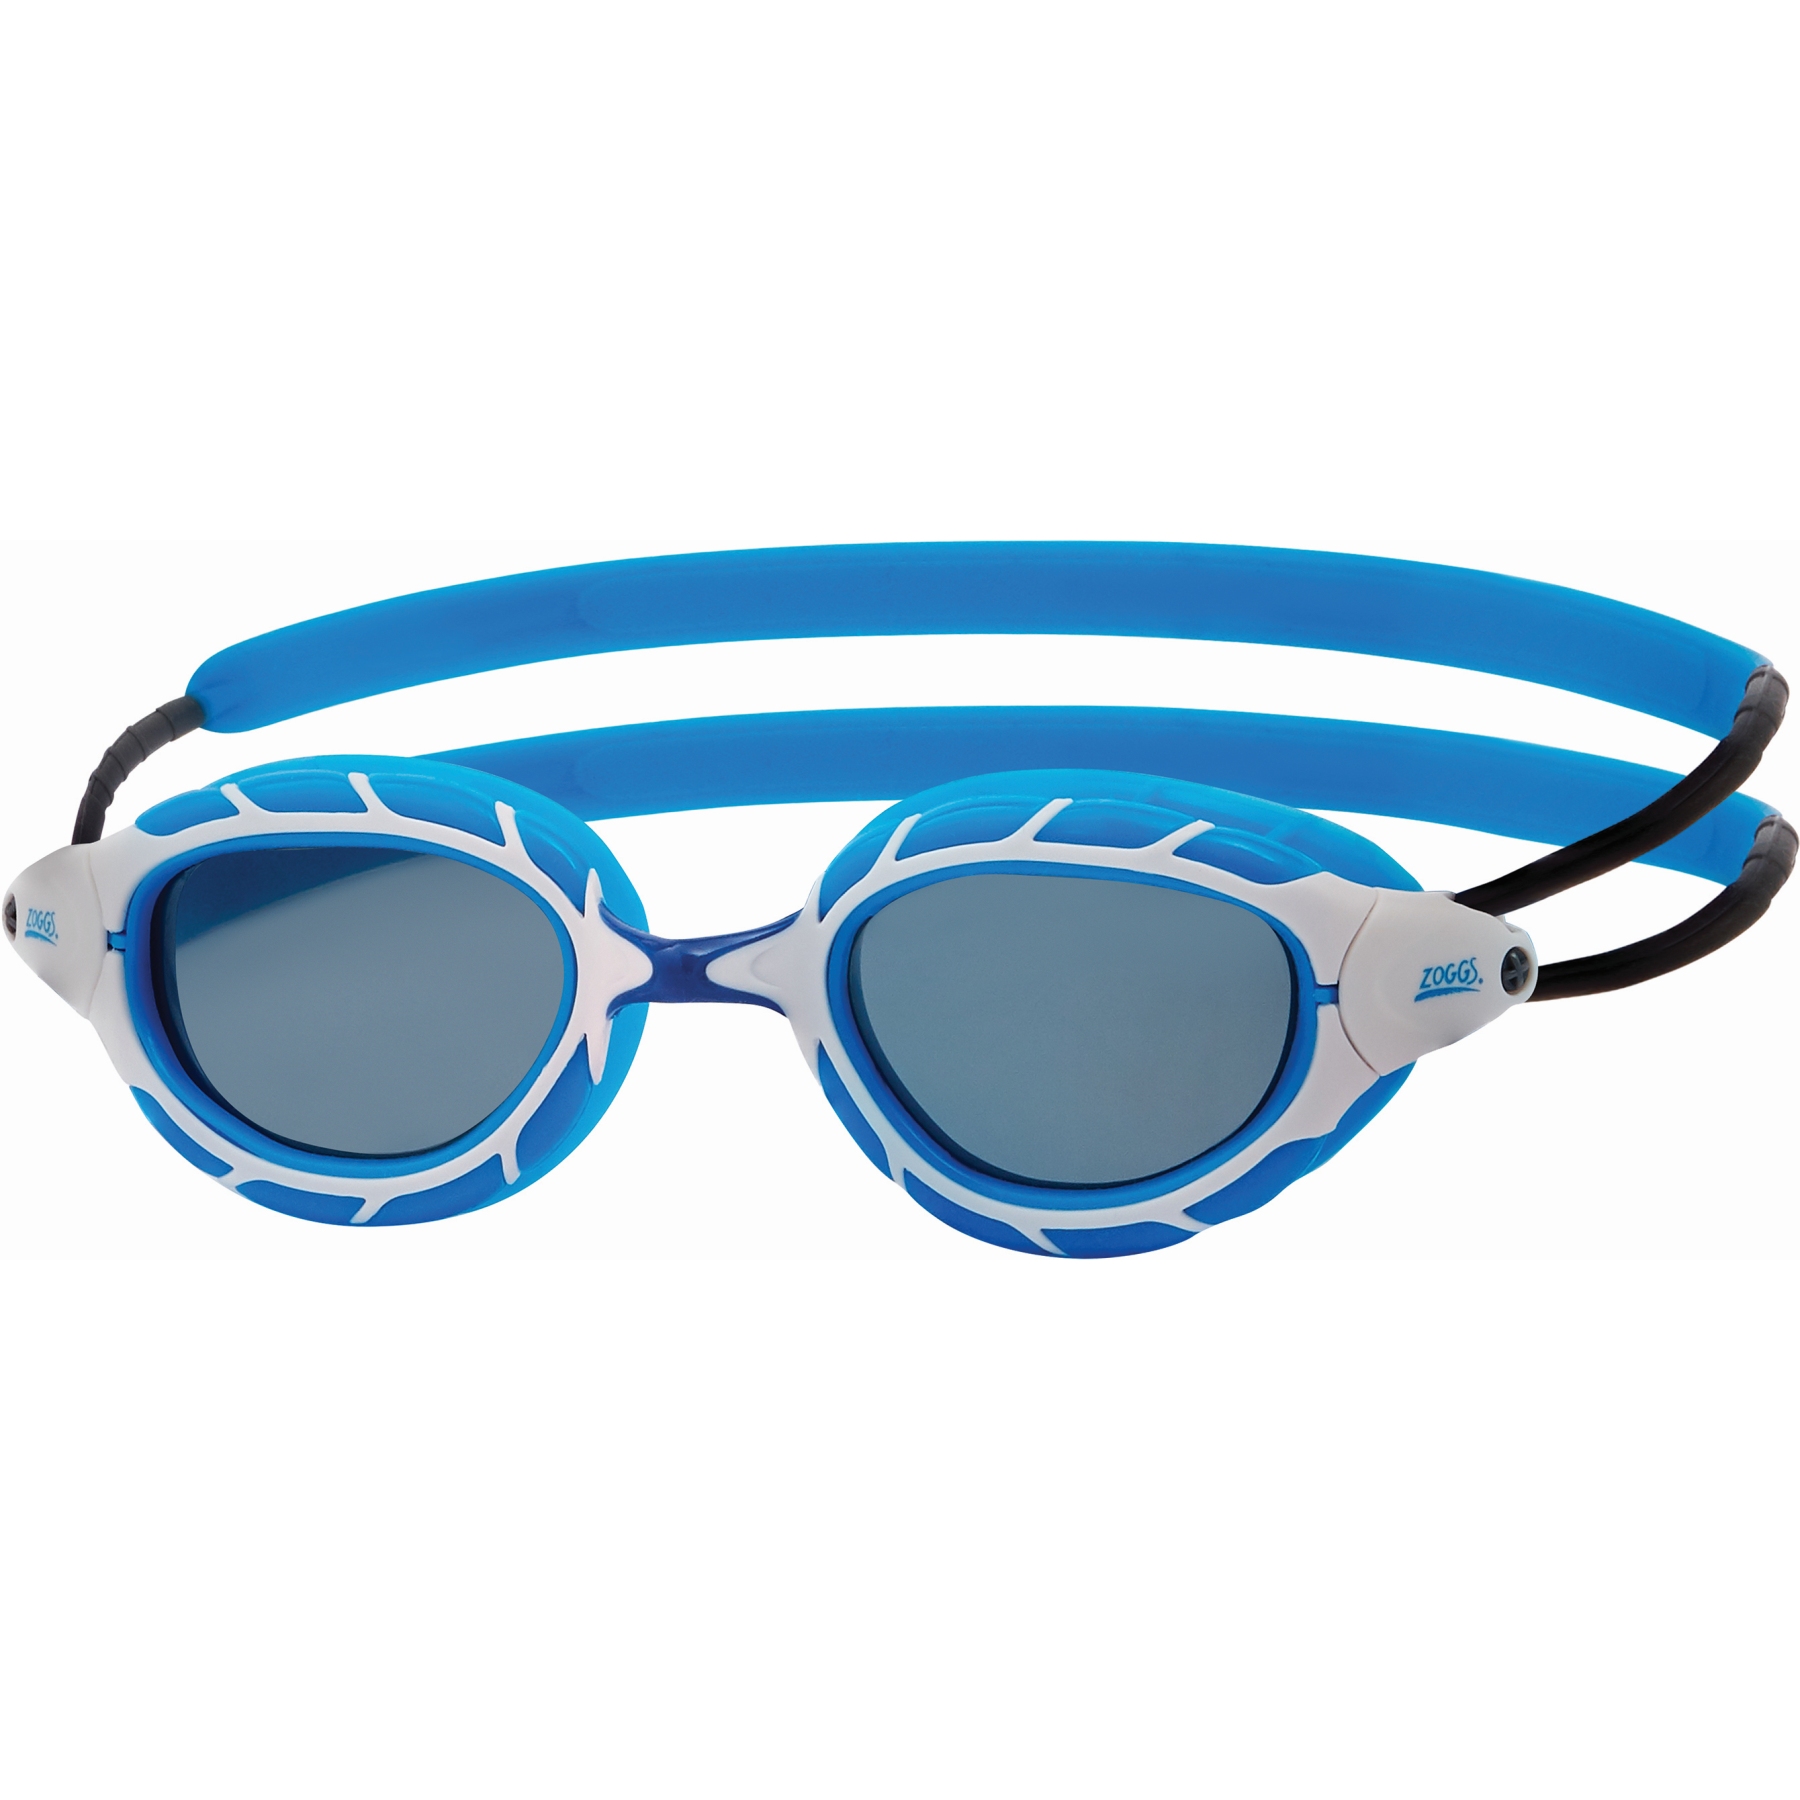 Picture of Zoggs Predator Swimming Goggles - Tint Smoke Lenses - Small Fit - Blue/White